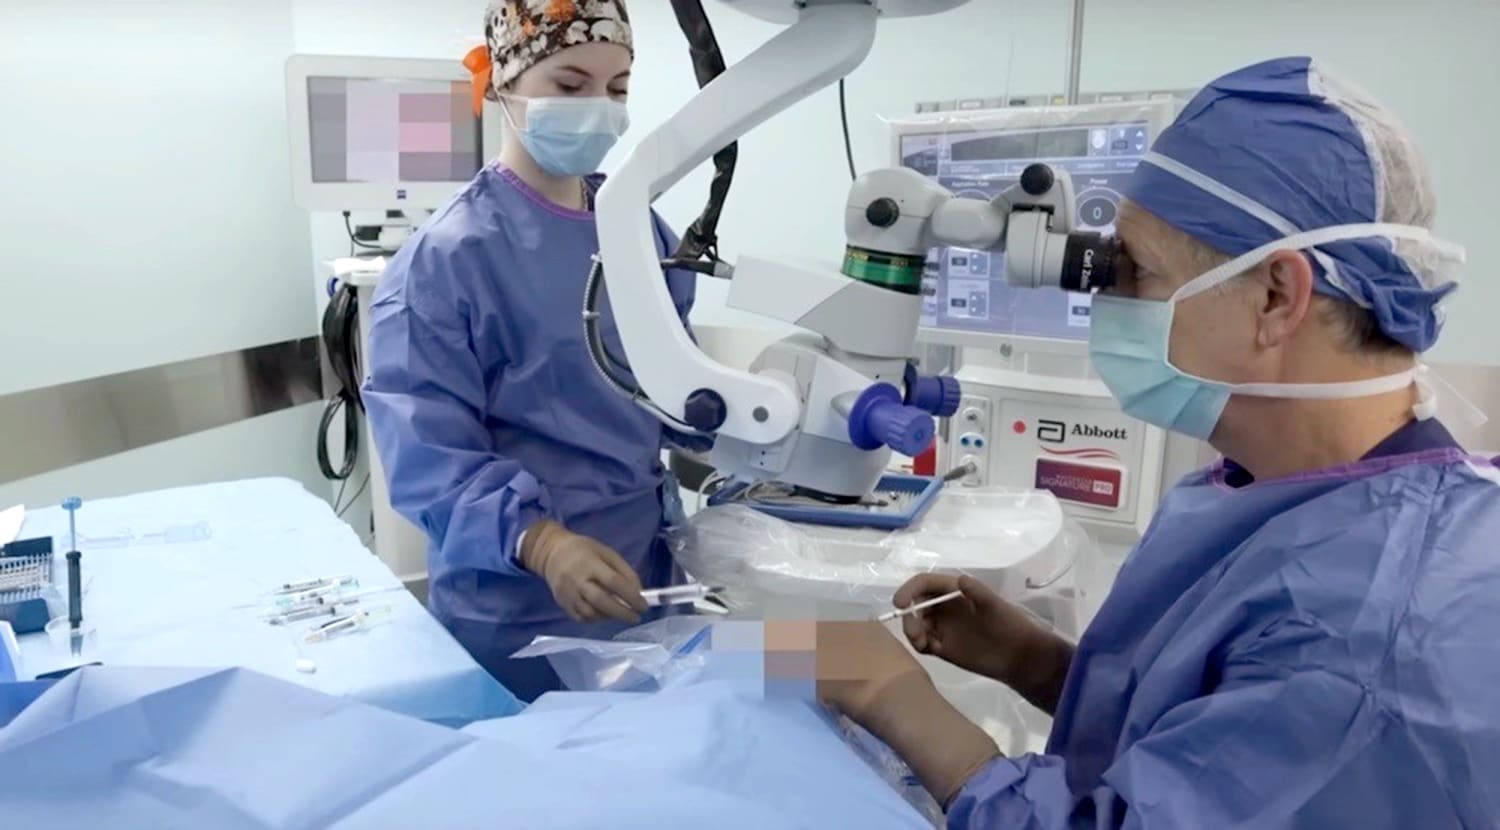 YouTube Star MrBeast Funds Cataract Surgery For 1,000 Blind People